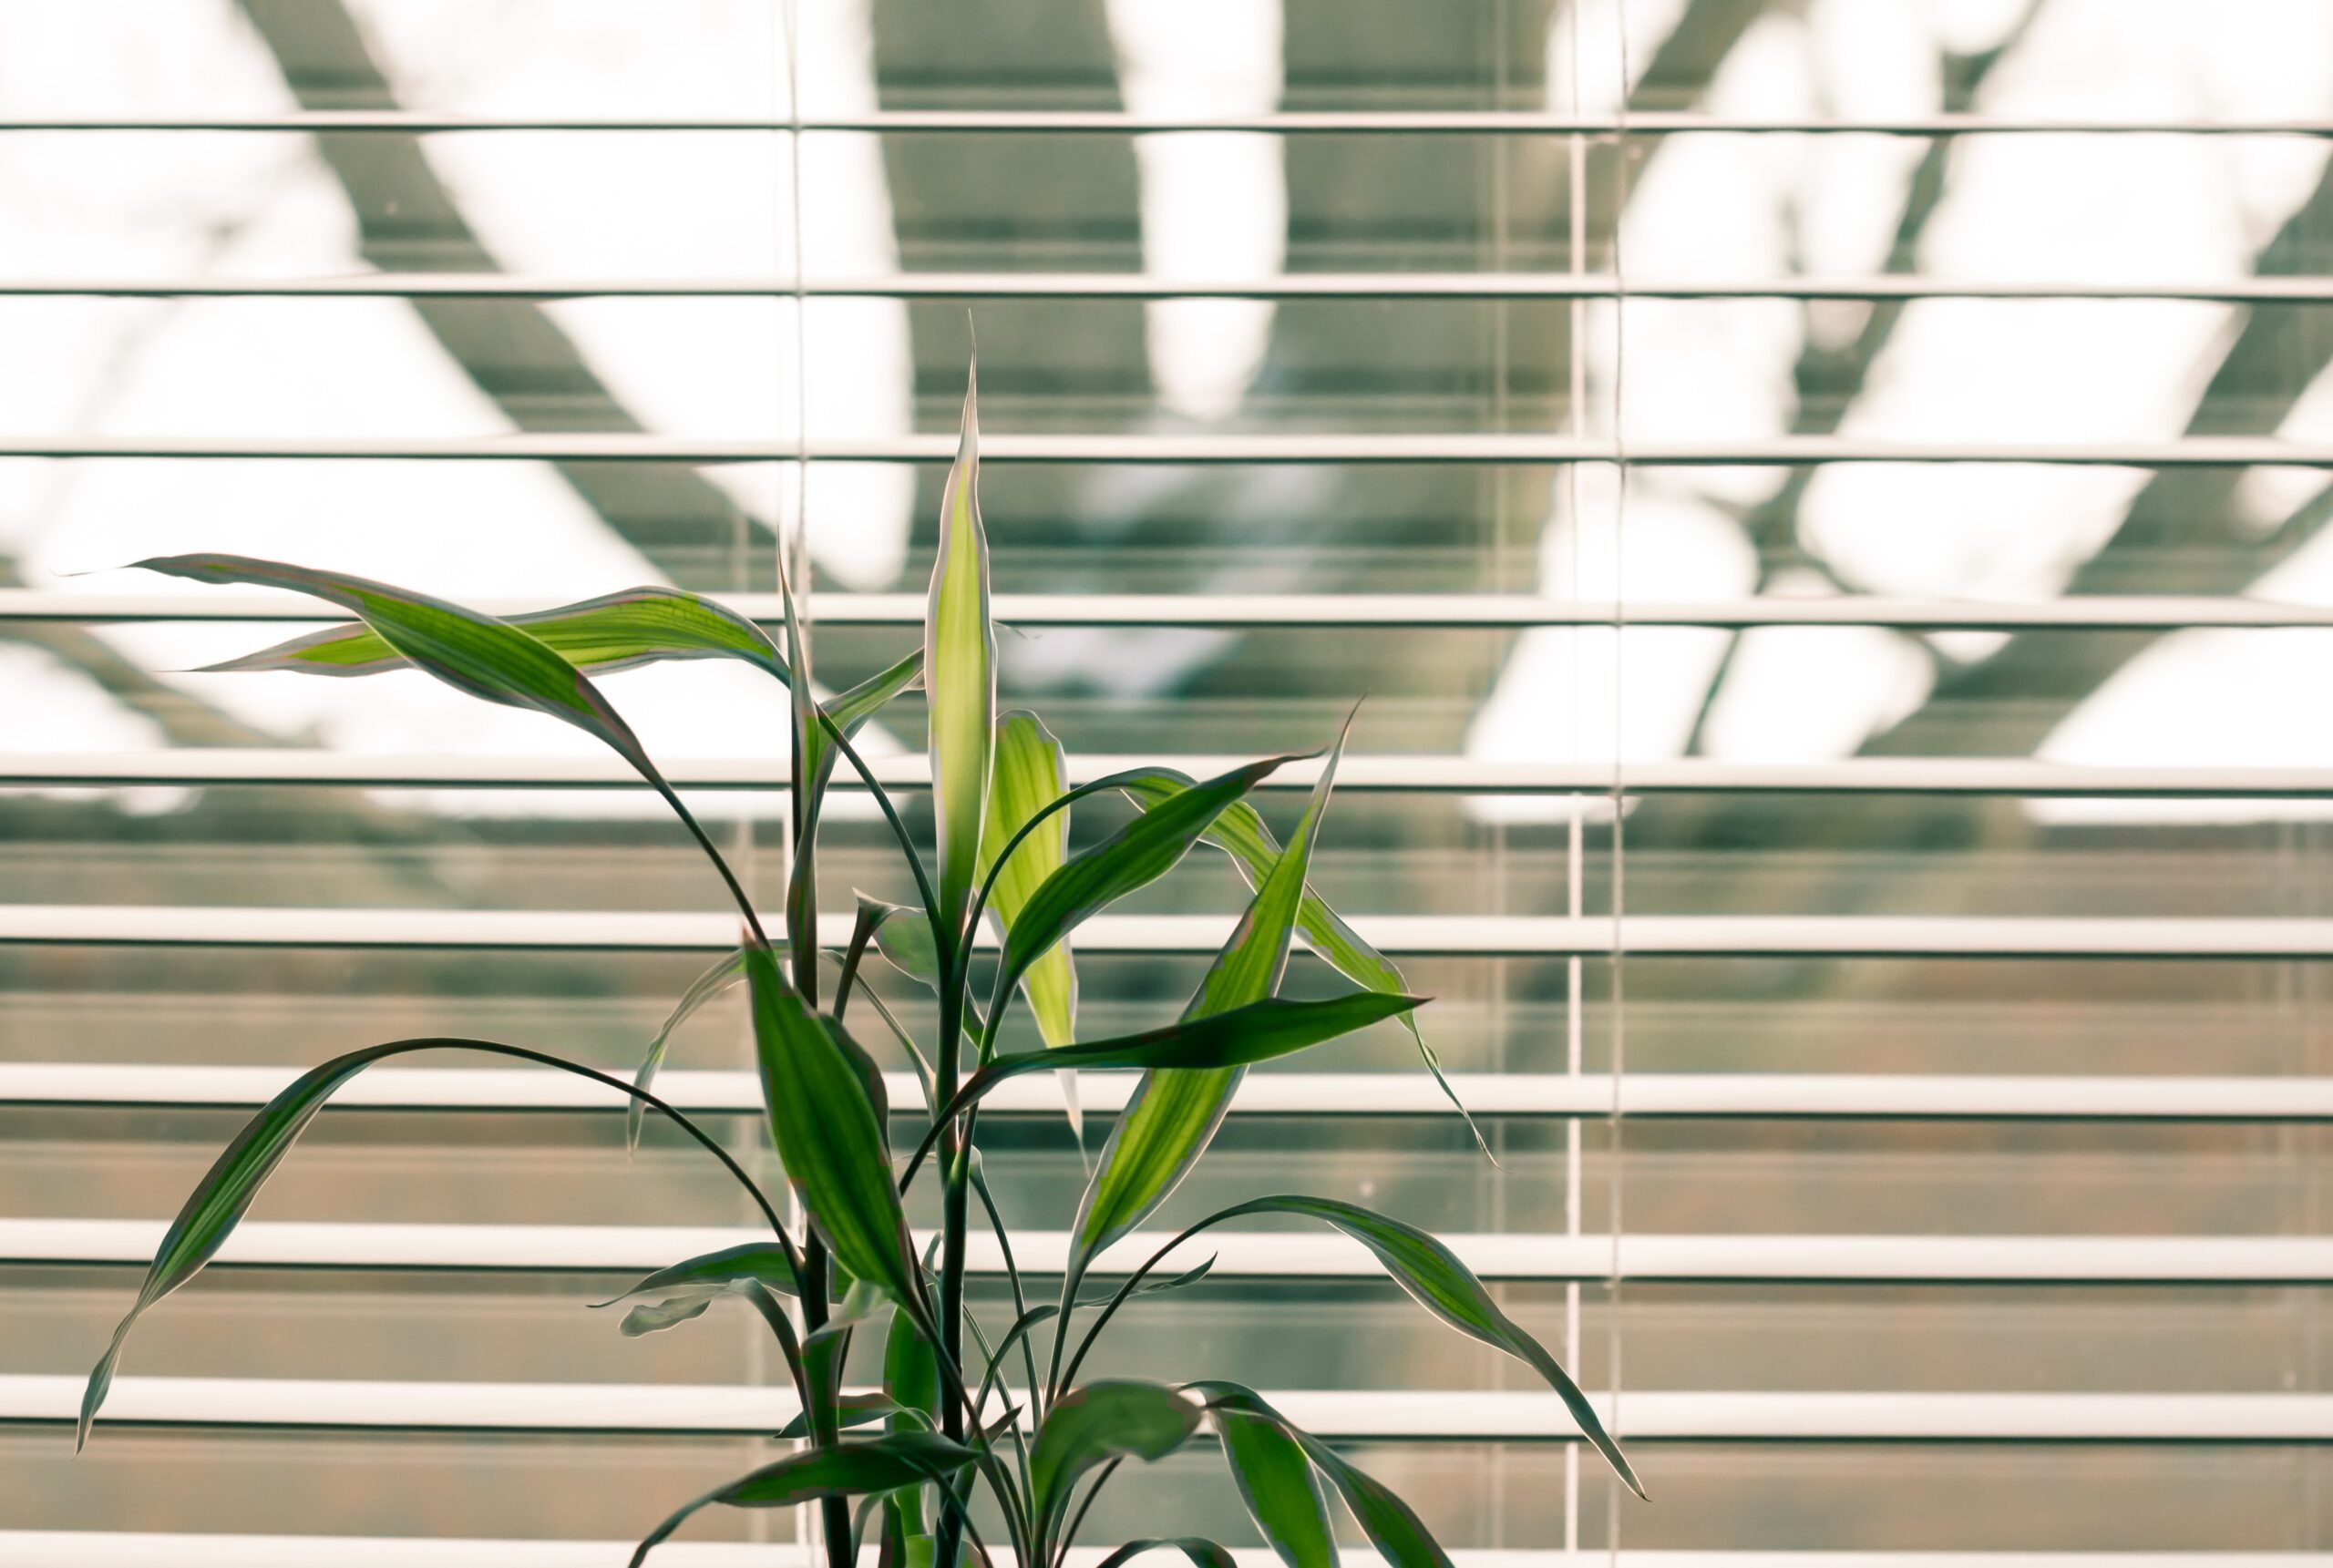 Blinds vs Curtains vs Shutters: Which to Choose?